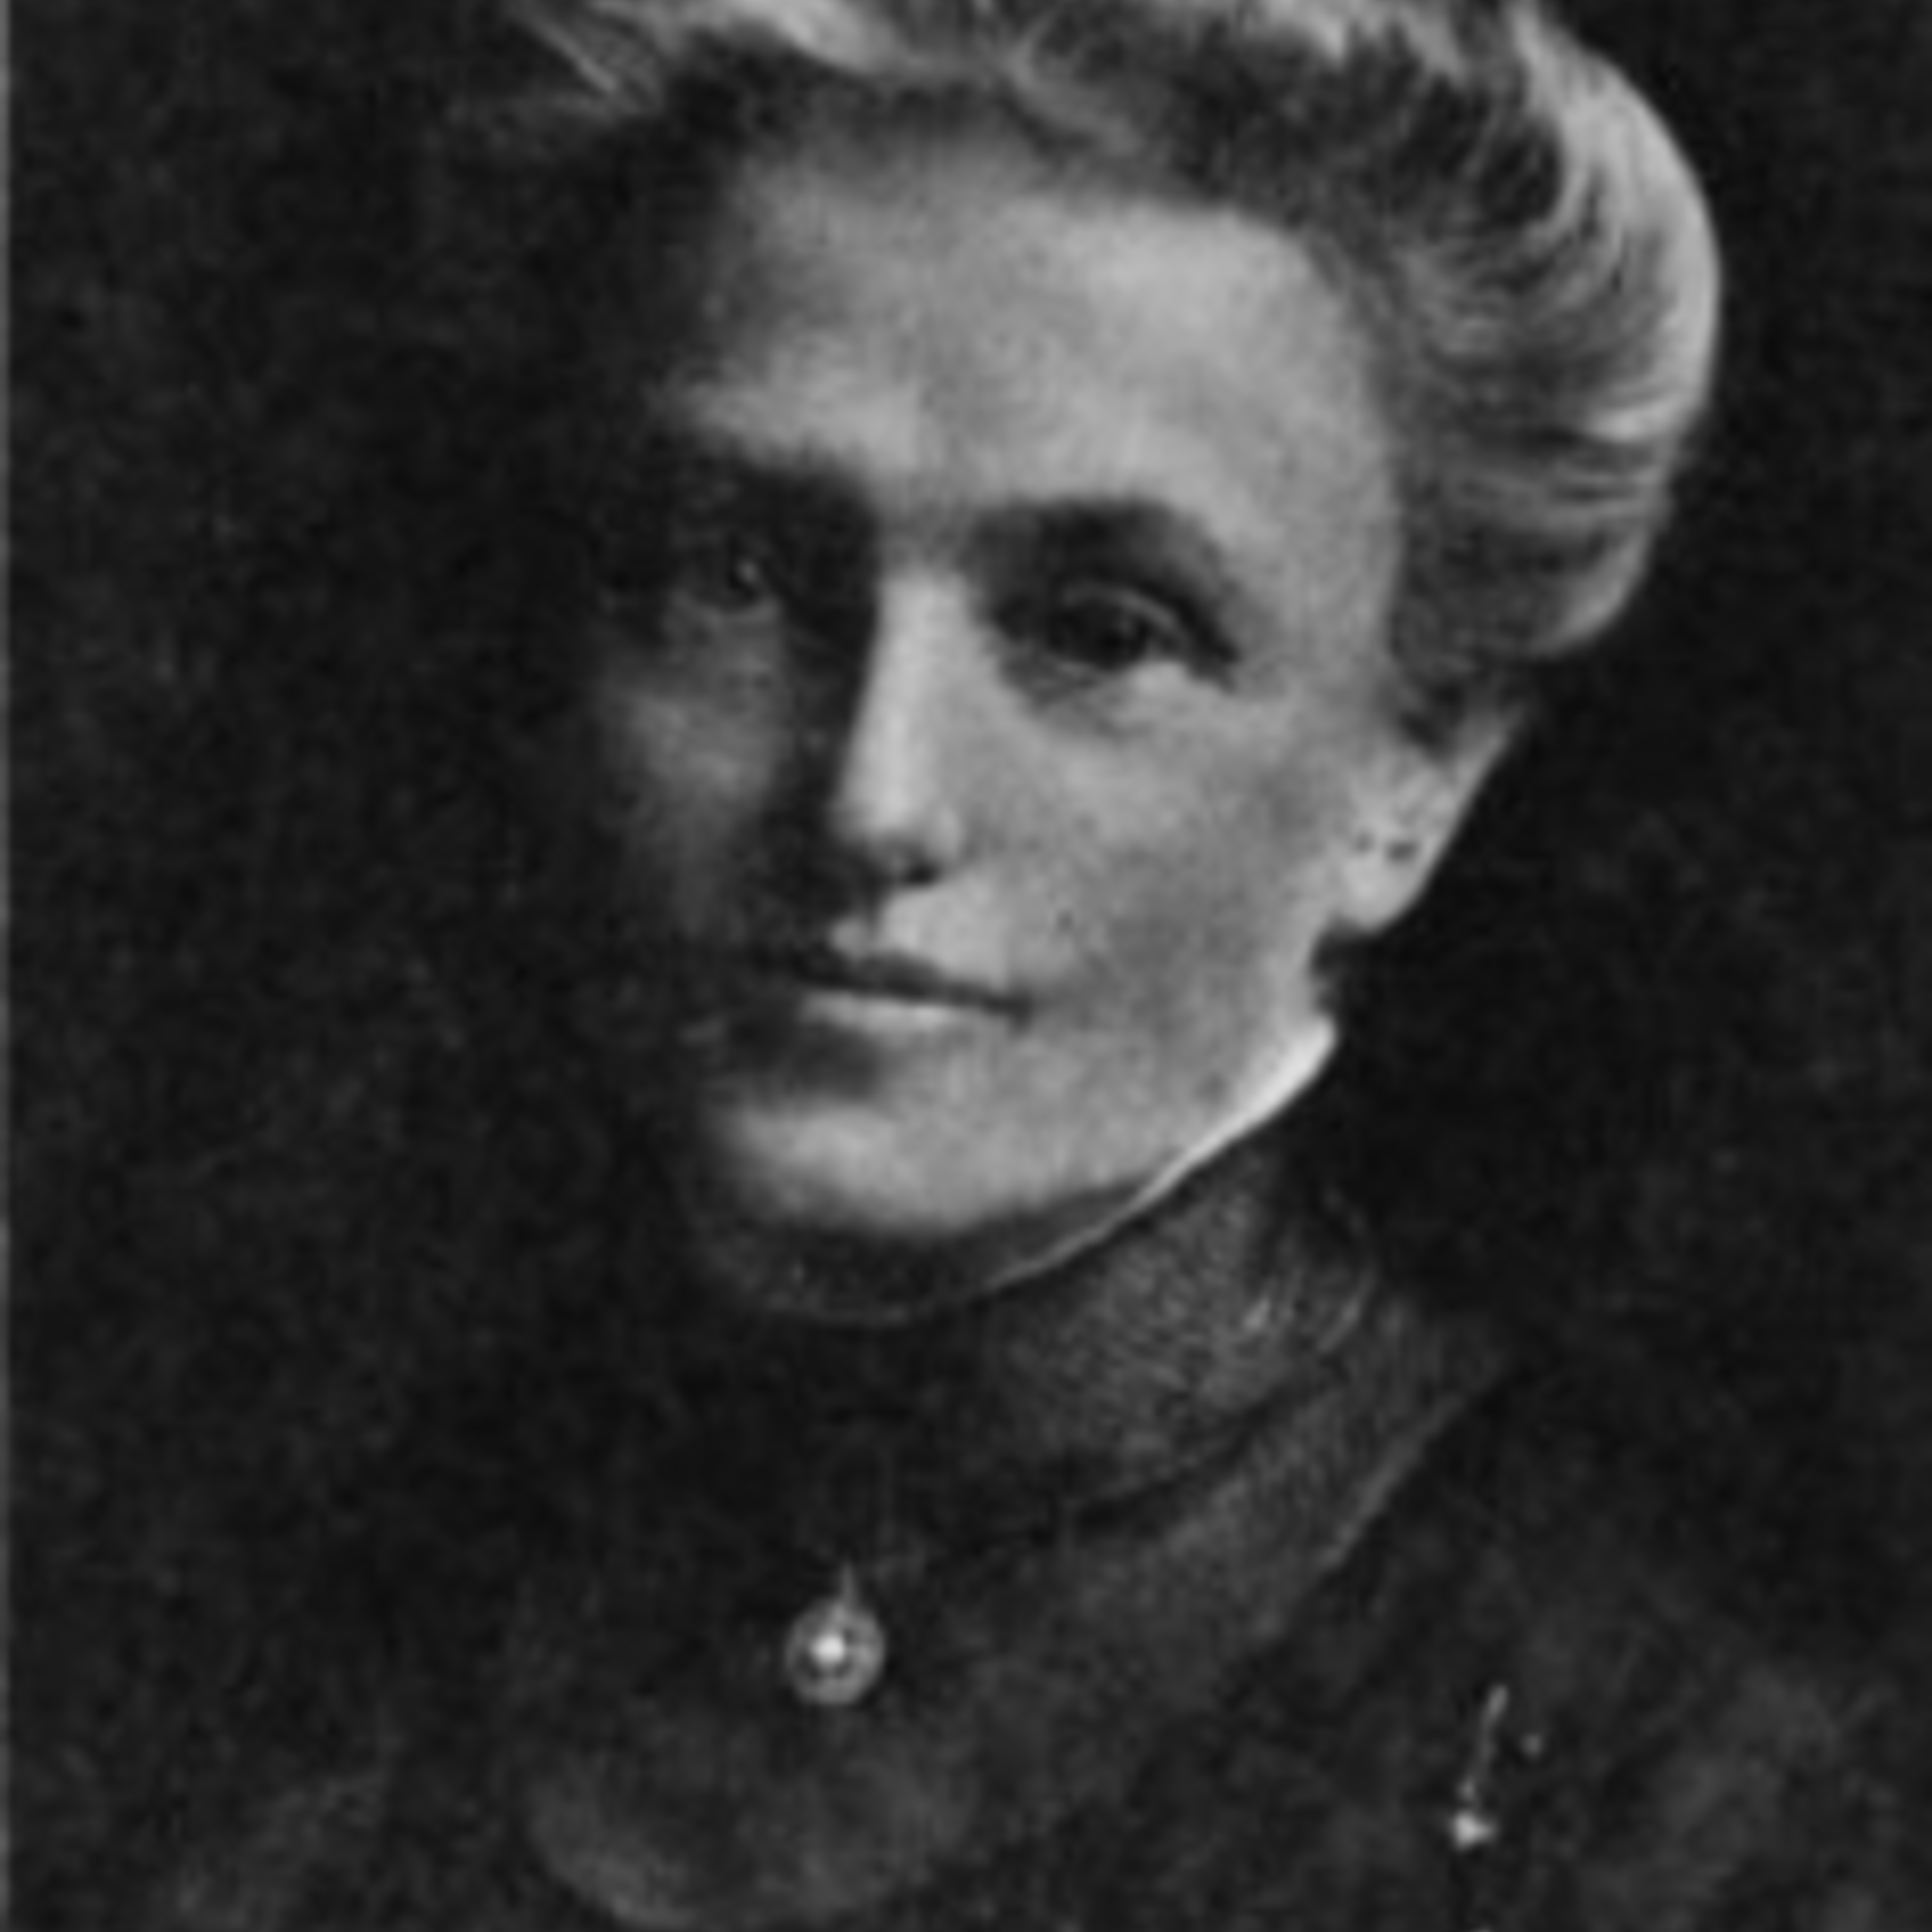 Mary S. Deering Caswell